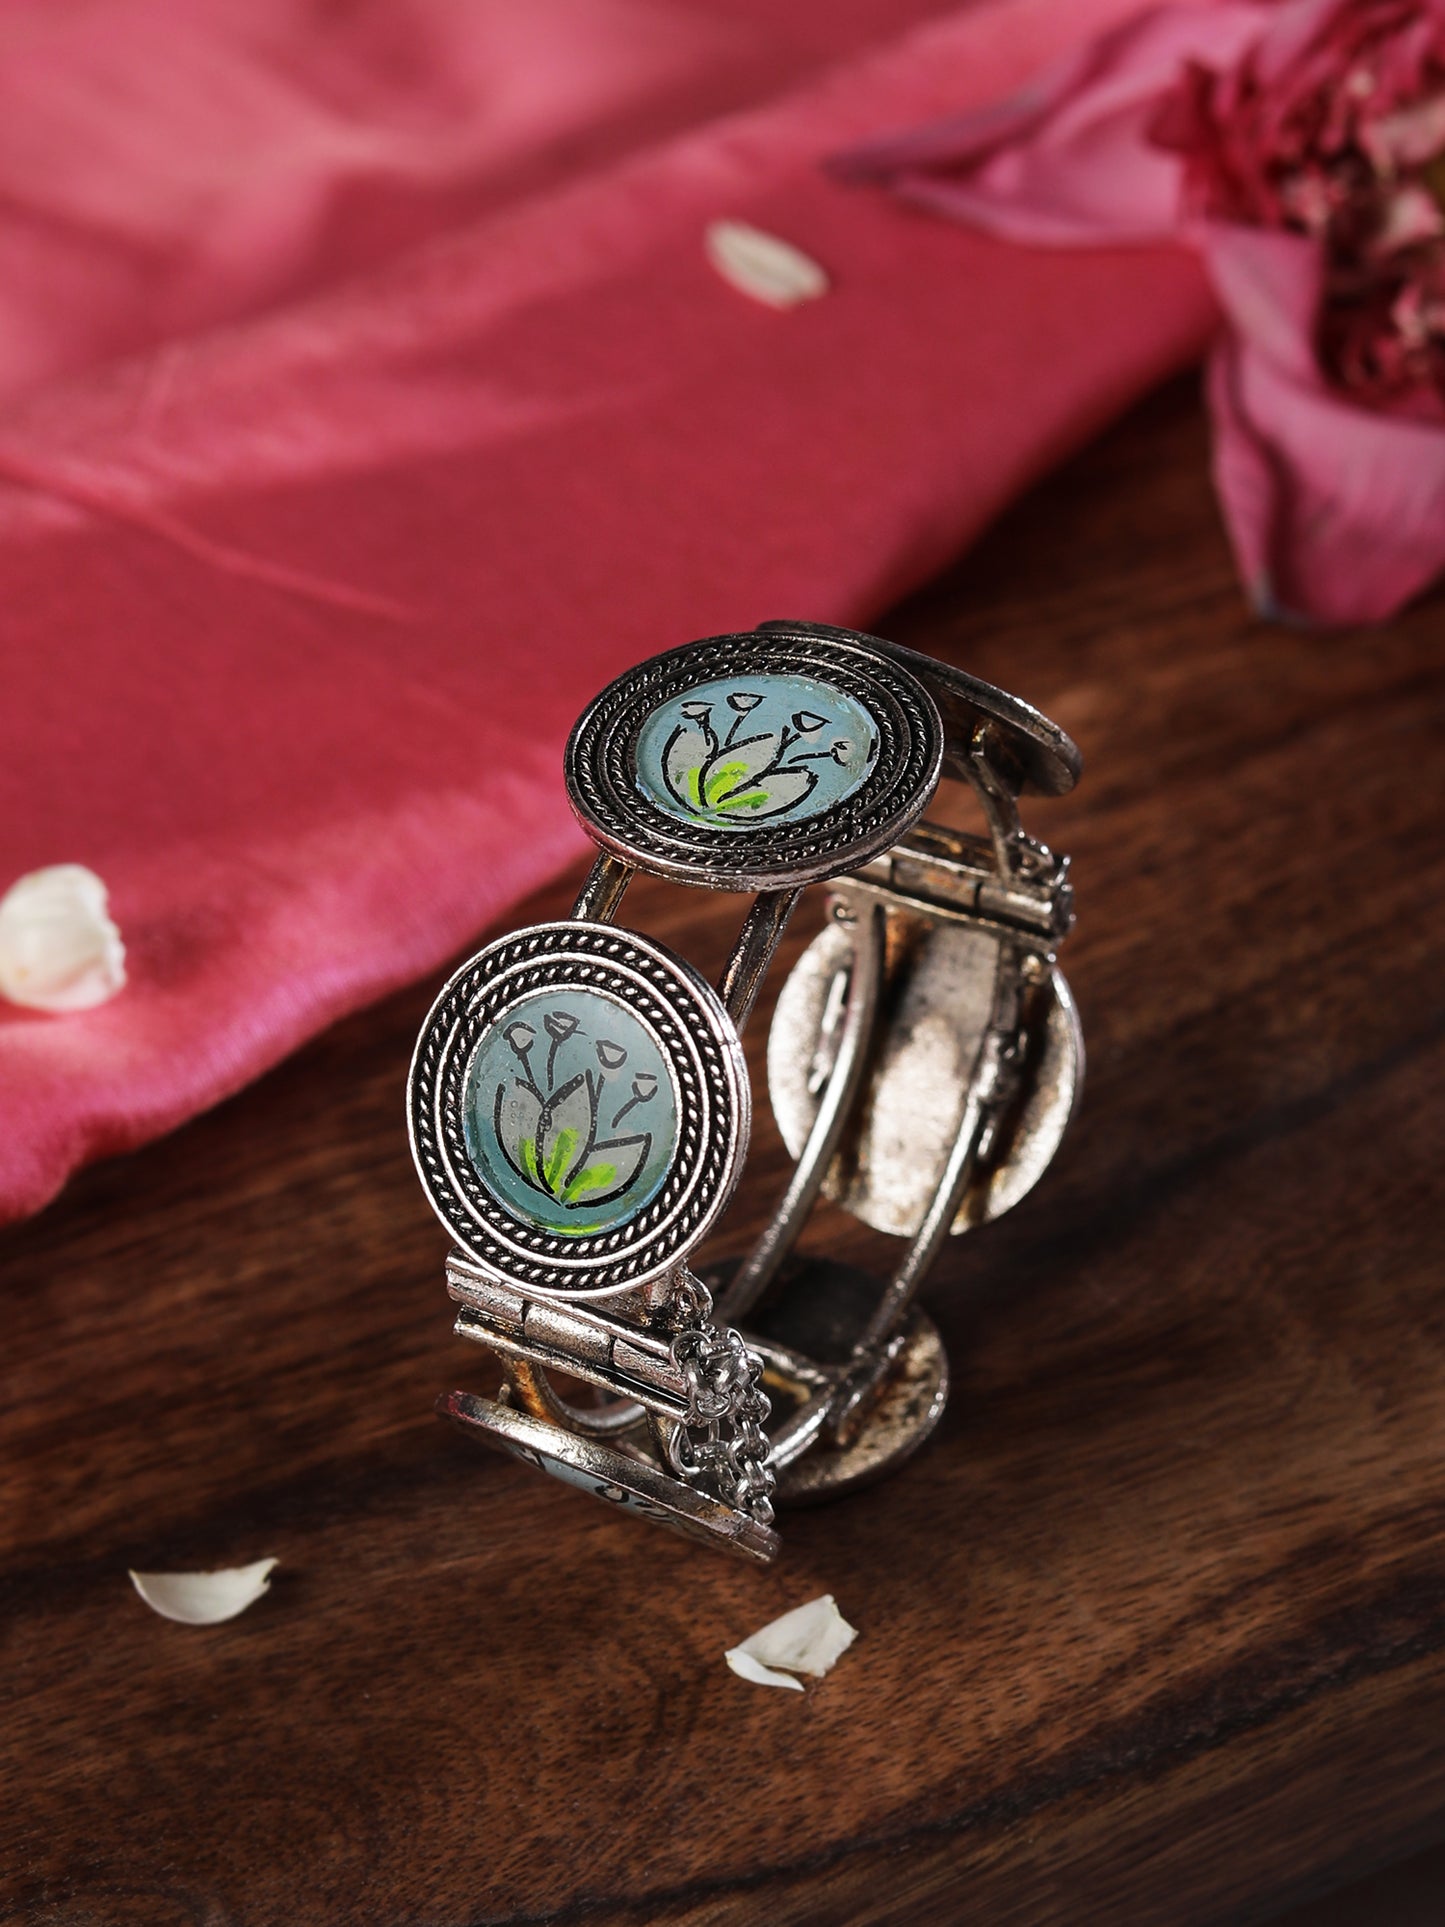 The Hand Painted Lotus in Wild Bracelet